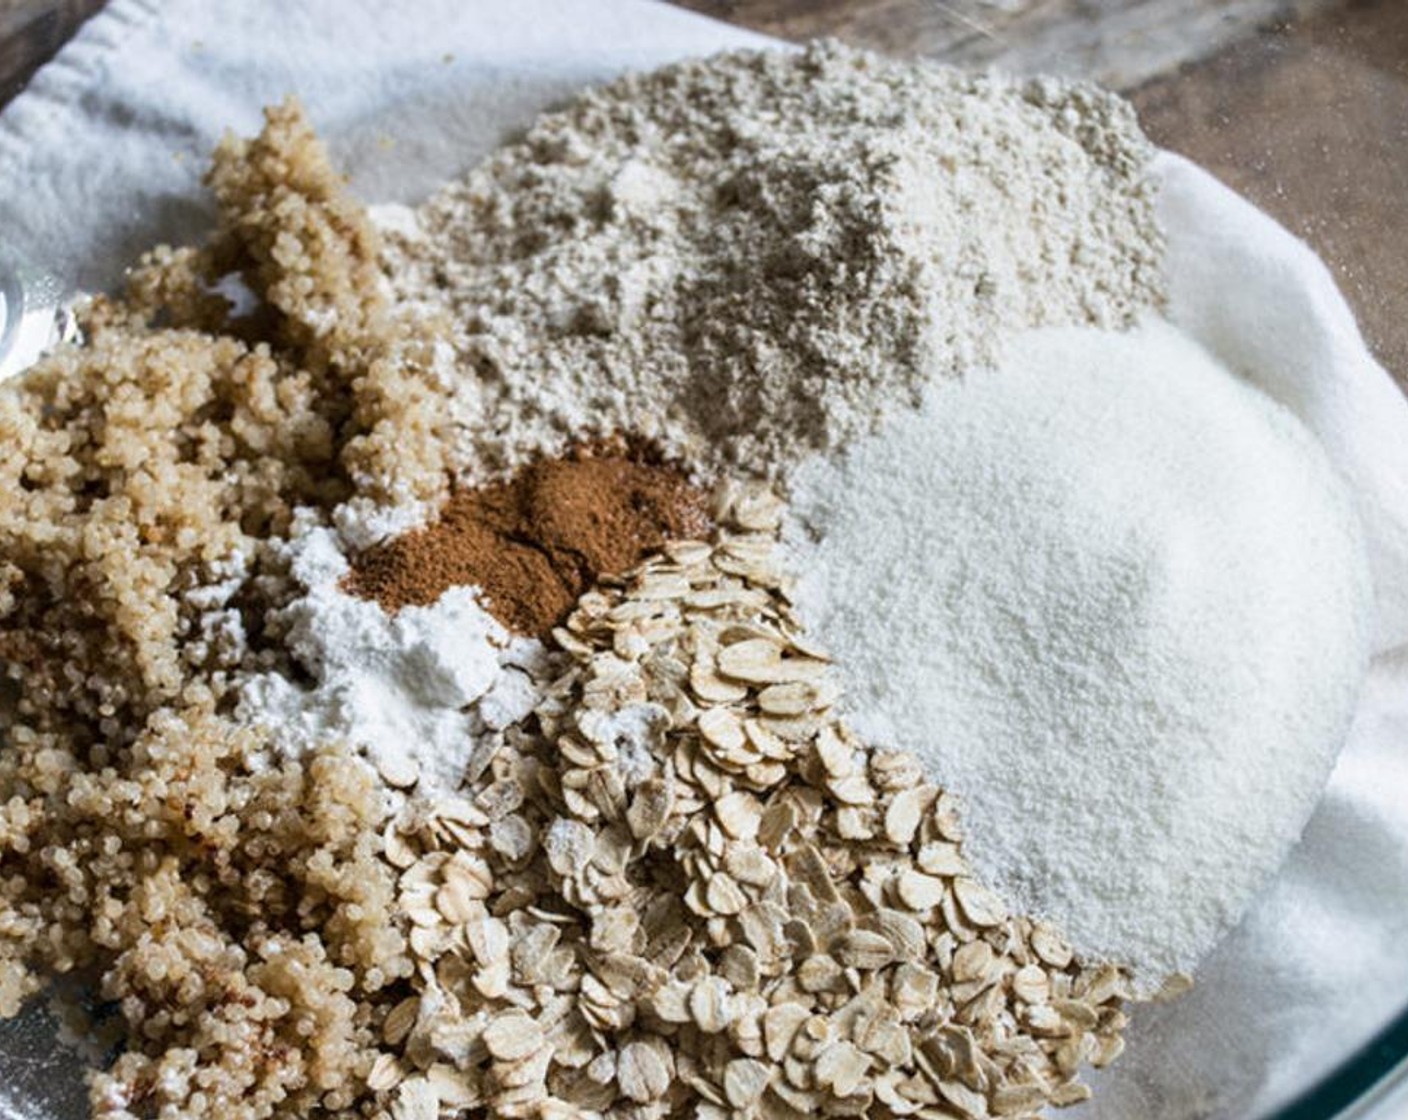 step 3 Add the processed oats, Oat Flour (1 cup), cooled Quinoa (1 cup), Baking Powder (1 tsp), Ground Cinnamon (1 tsp), and Vital Protein Marine Collagen (1/3 cup) to large bowl, stir until well blended.